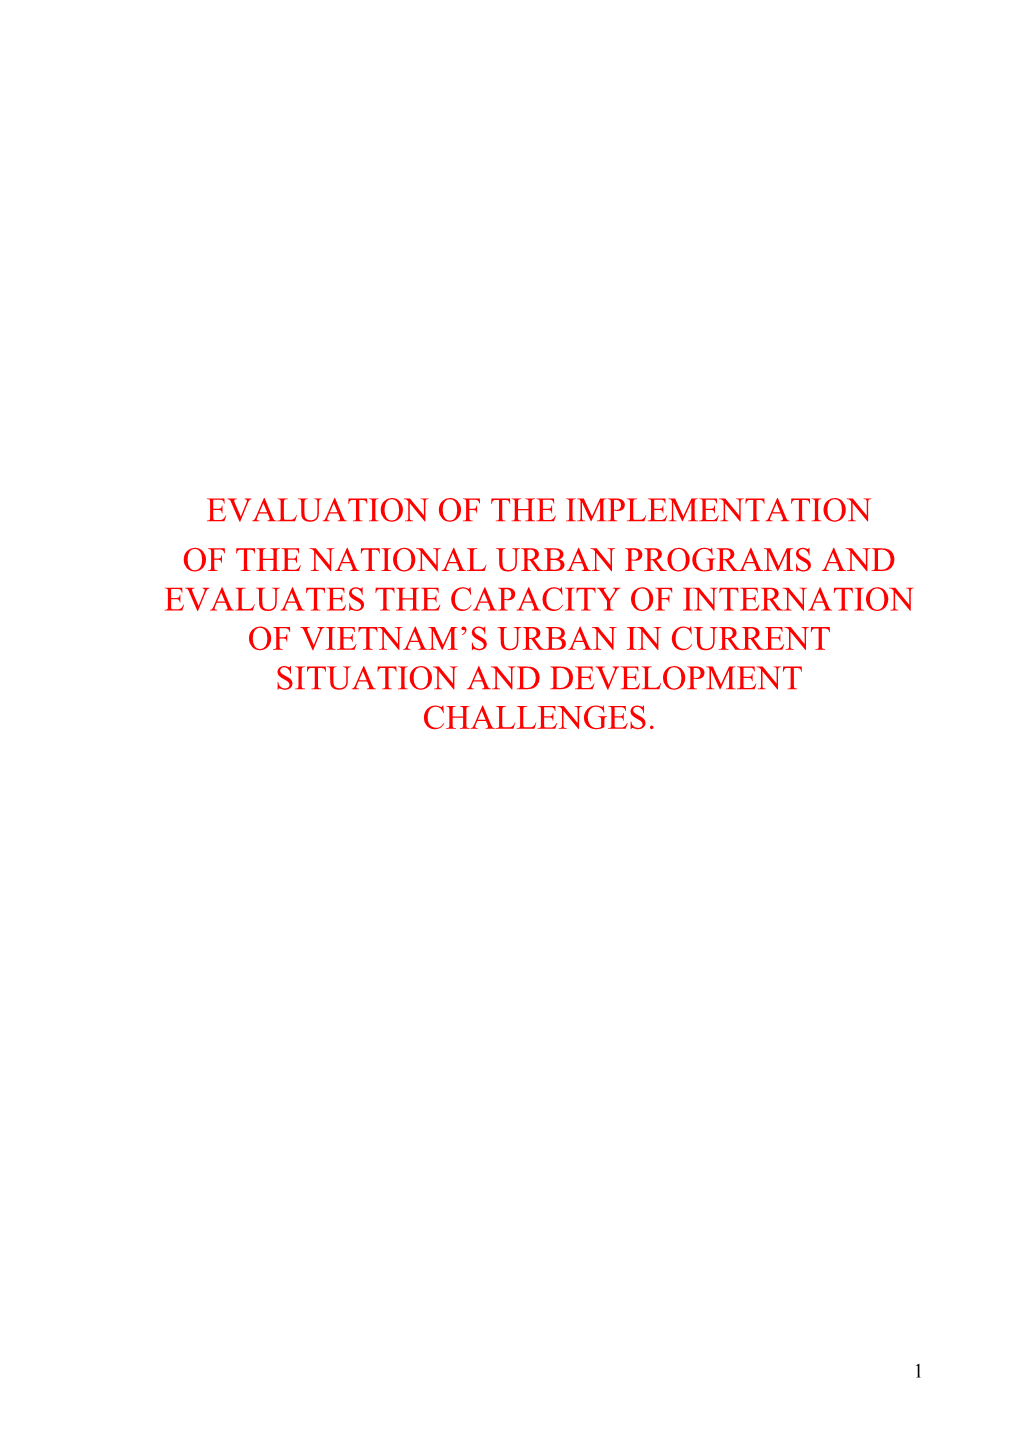 Evaluation of the Implementation of The